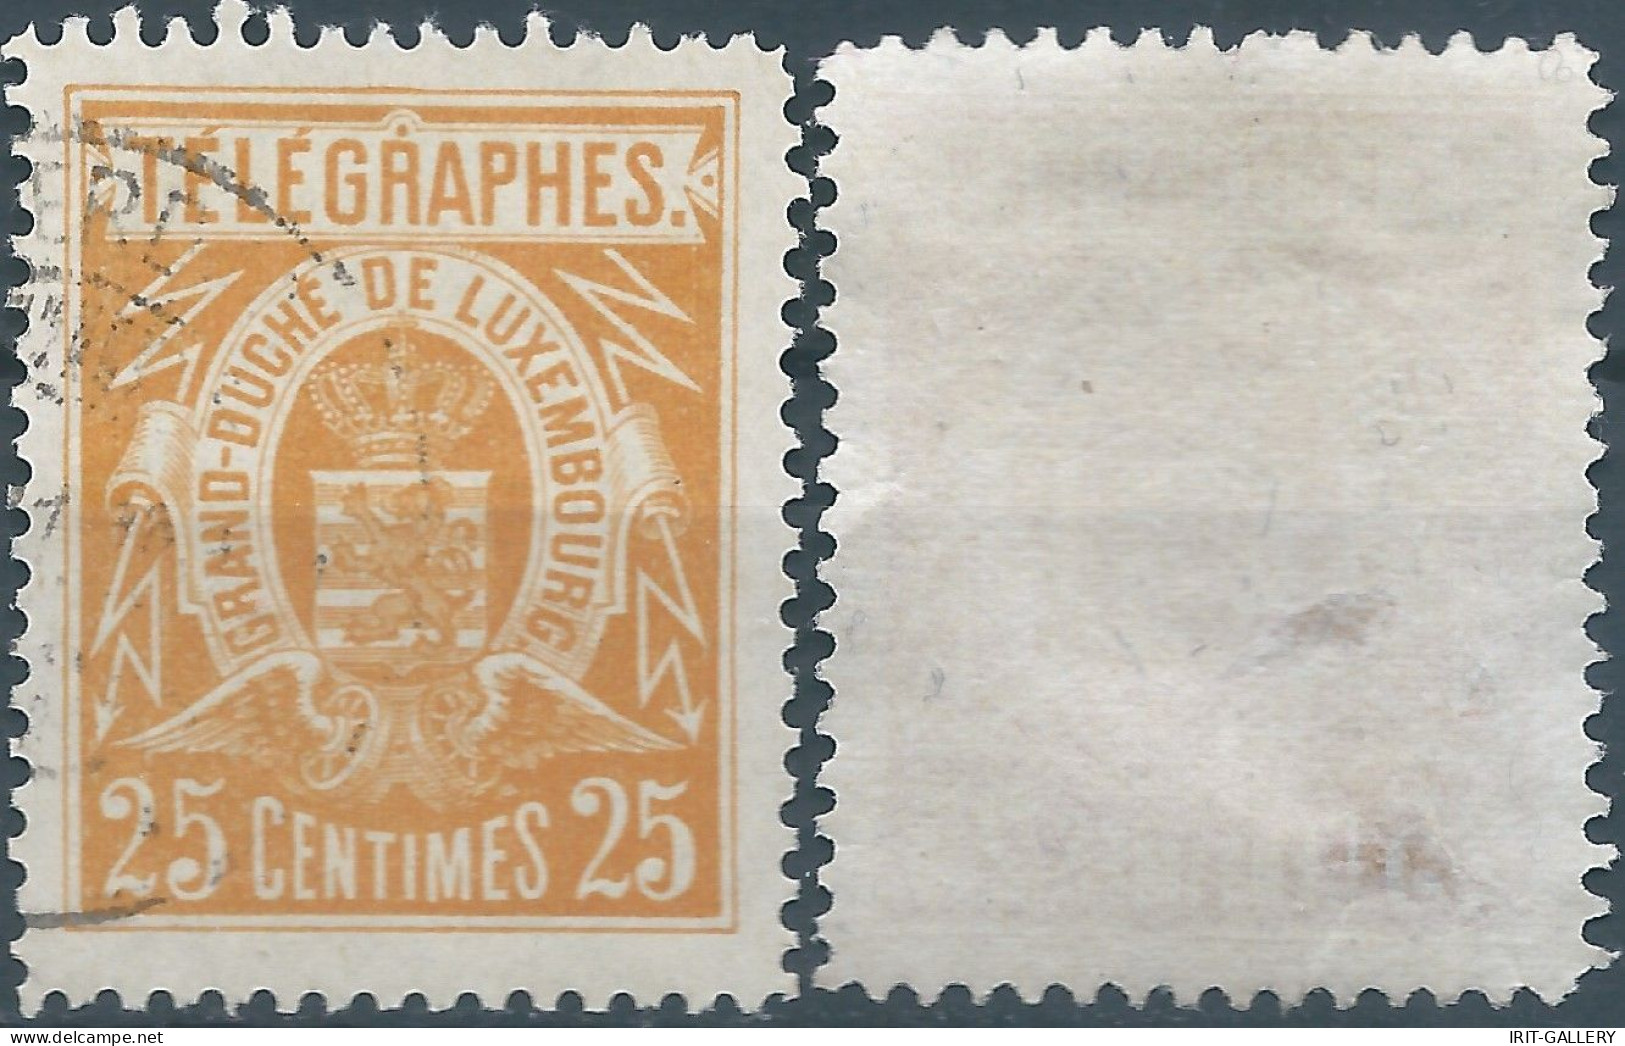 Lussemburgo - Luxembourg -TELEGRAPHES 1883 Telegraph Stamps,25C,Used & Not Cancelled, Mint - Télégraphes